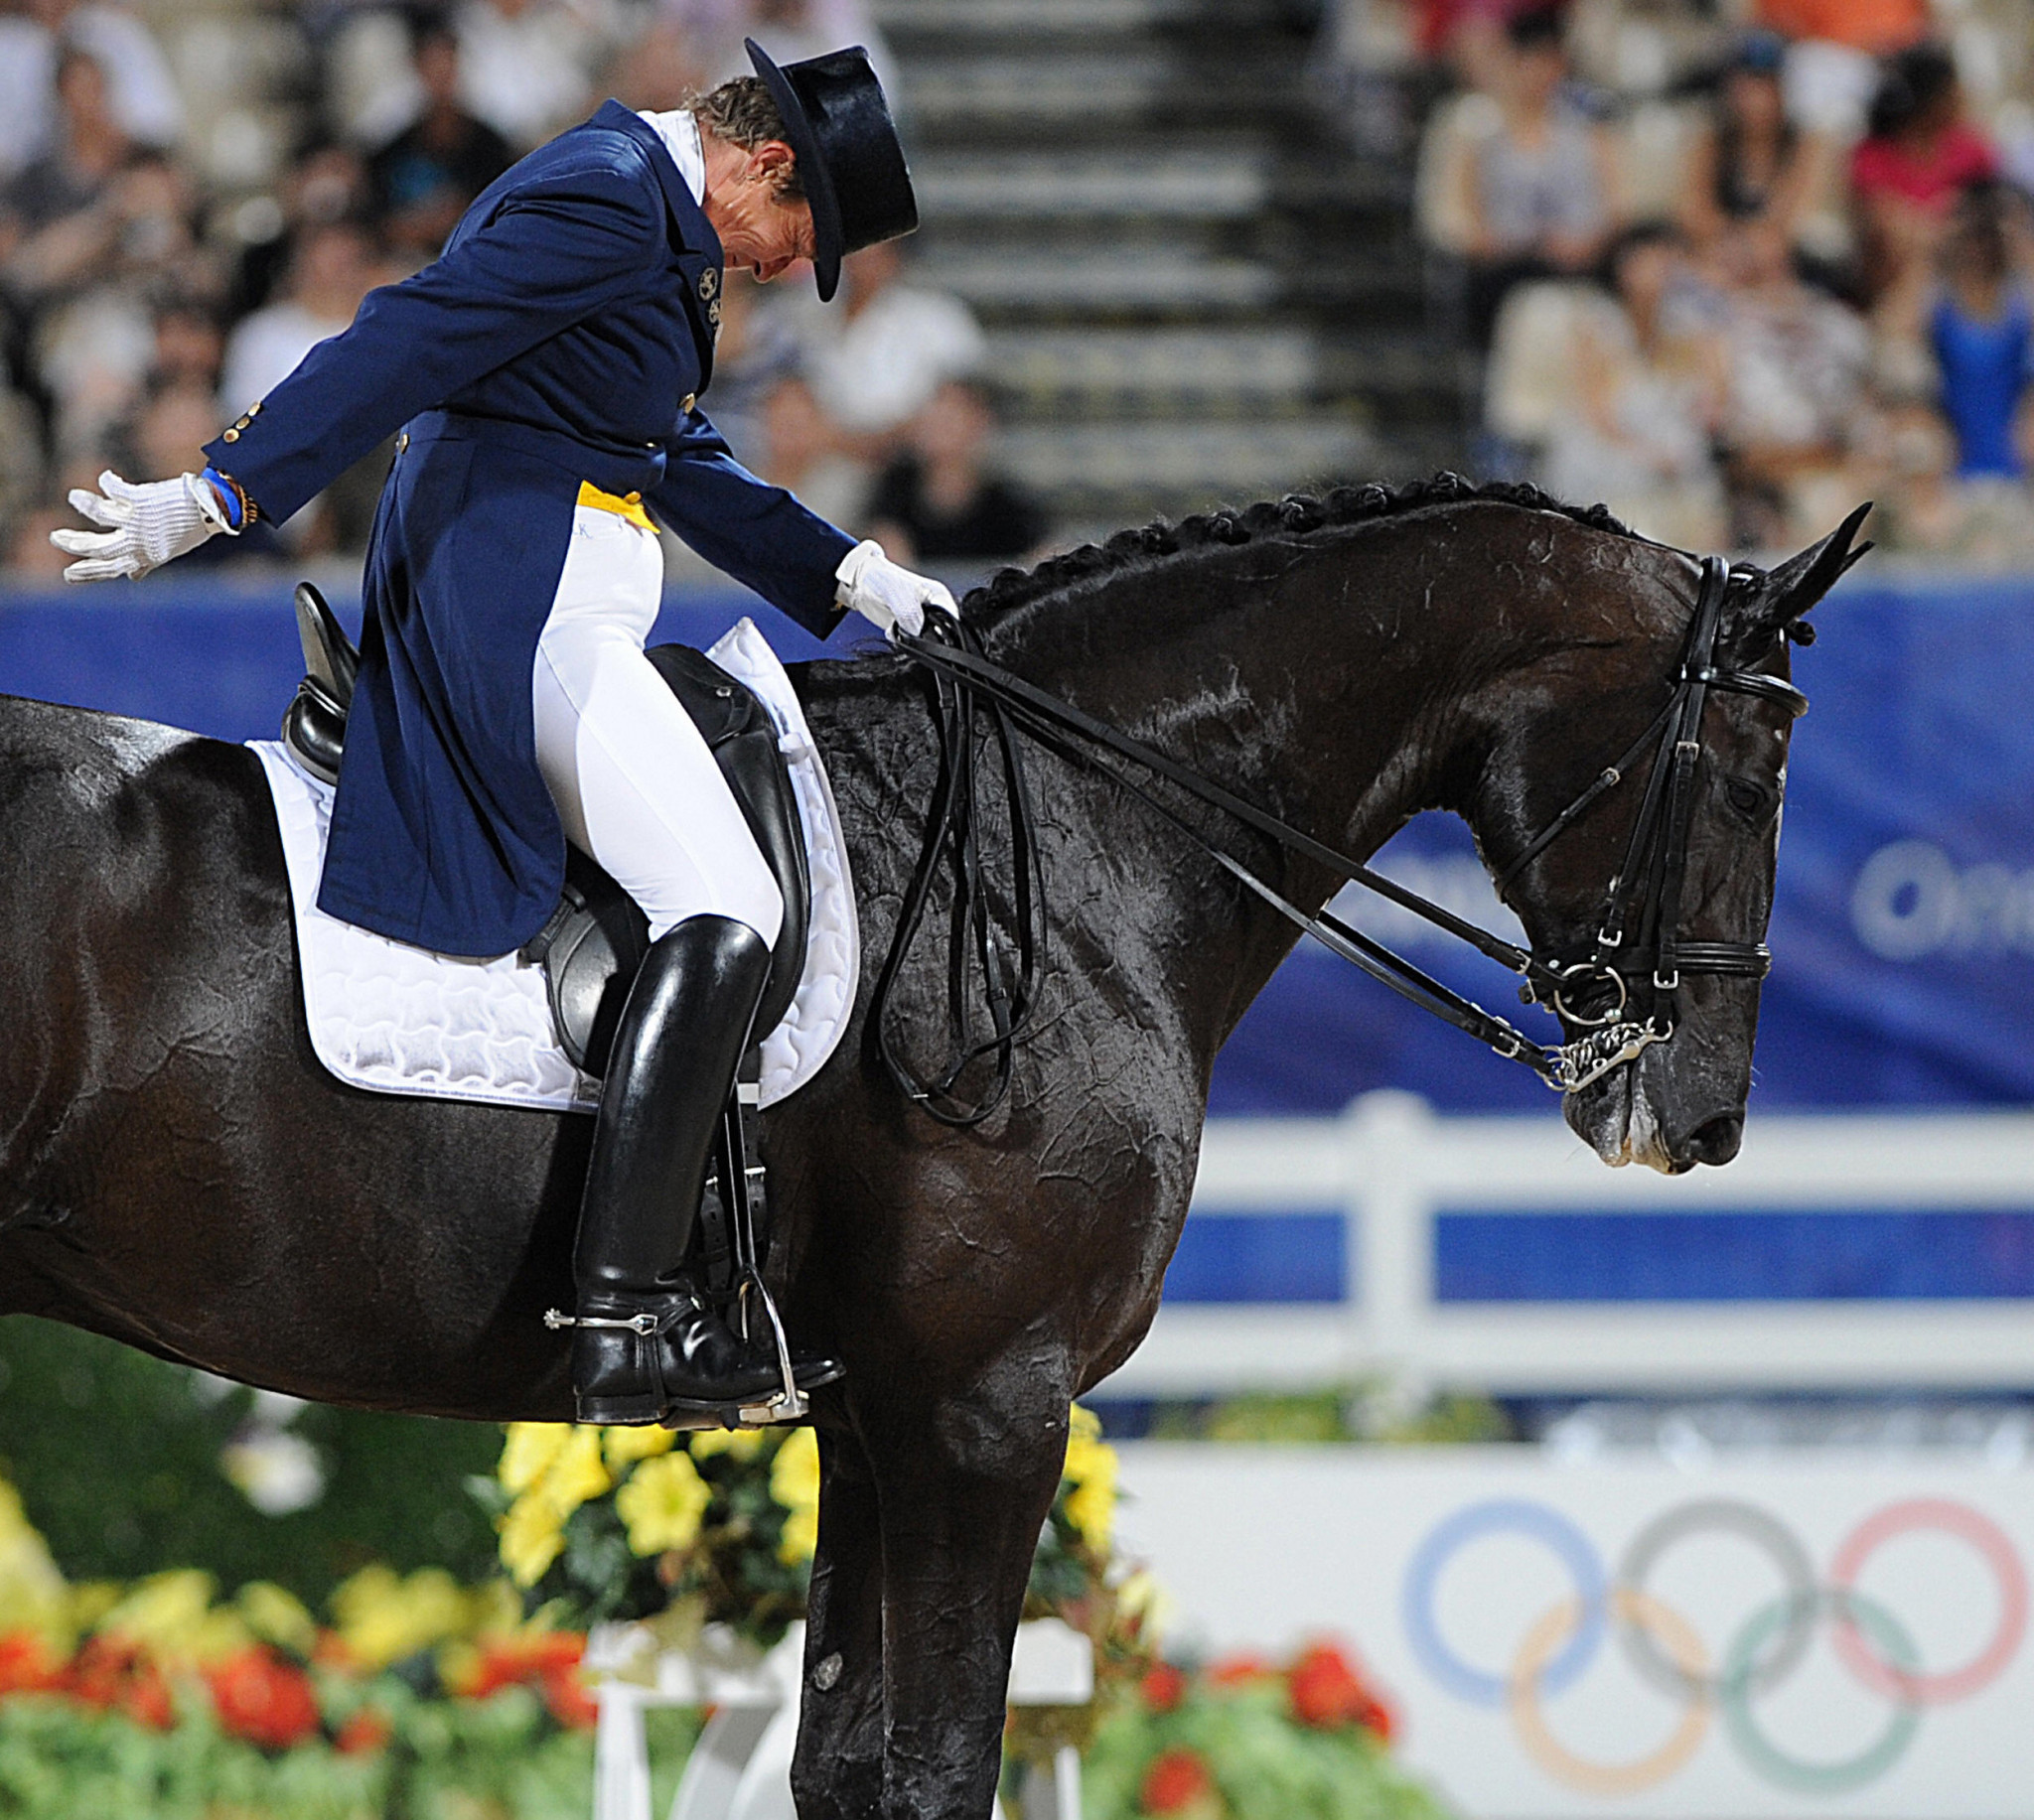 International Dressage Riders Club President Kyra Kyrklund sent the petition to the FEI ©Getty Images